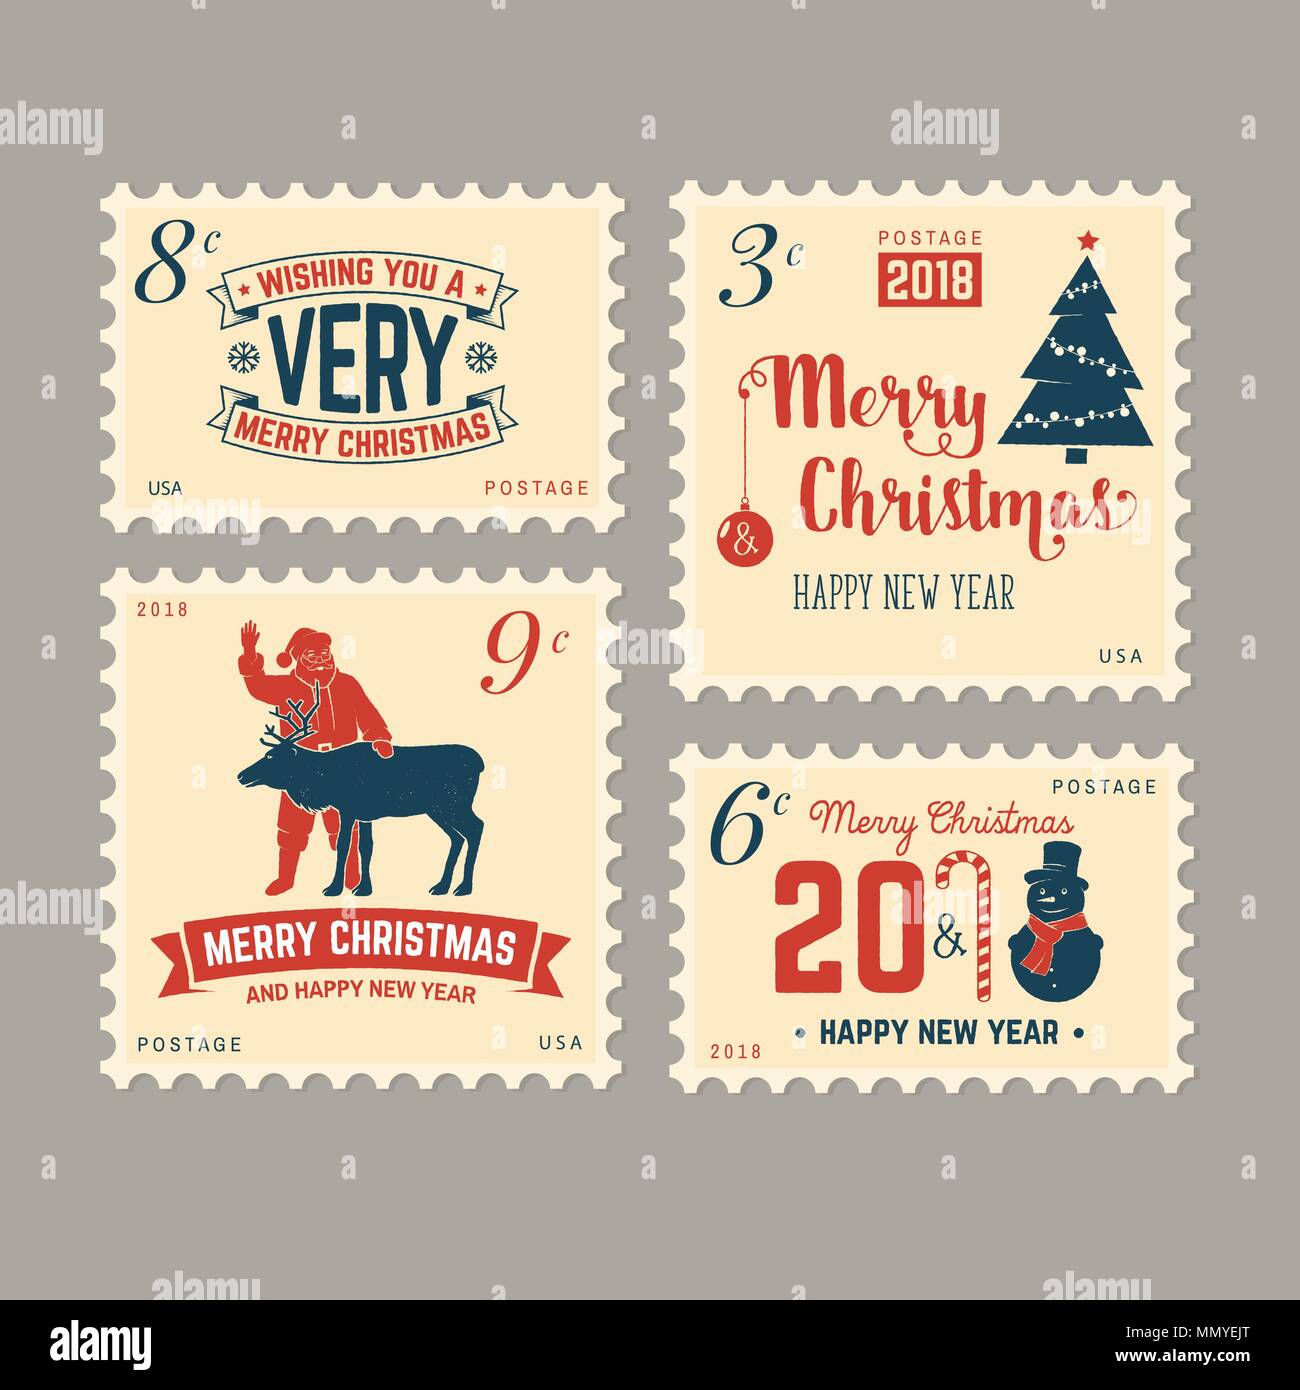 Merry Christmas and Happy New Year 2018 retro postage stamp with Santa Claus, Christmas tree, gifts and reindeer. Vector illustration. Stock Vector